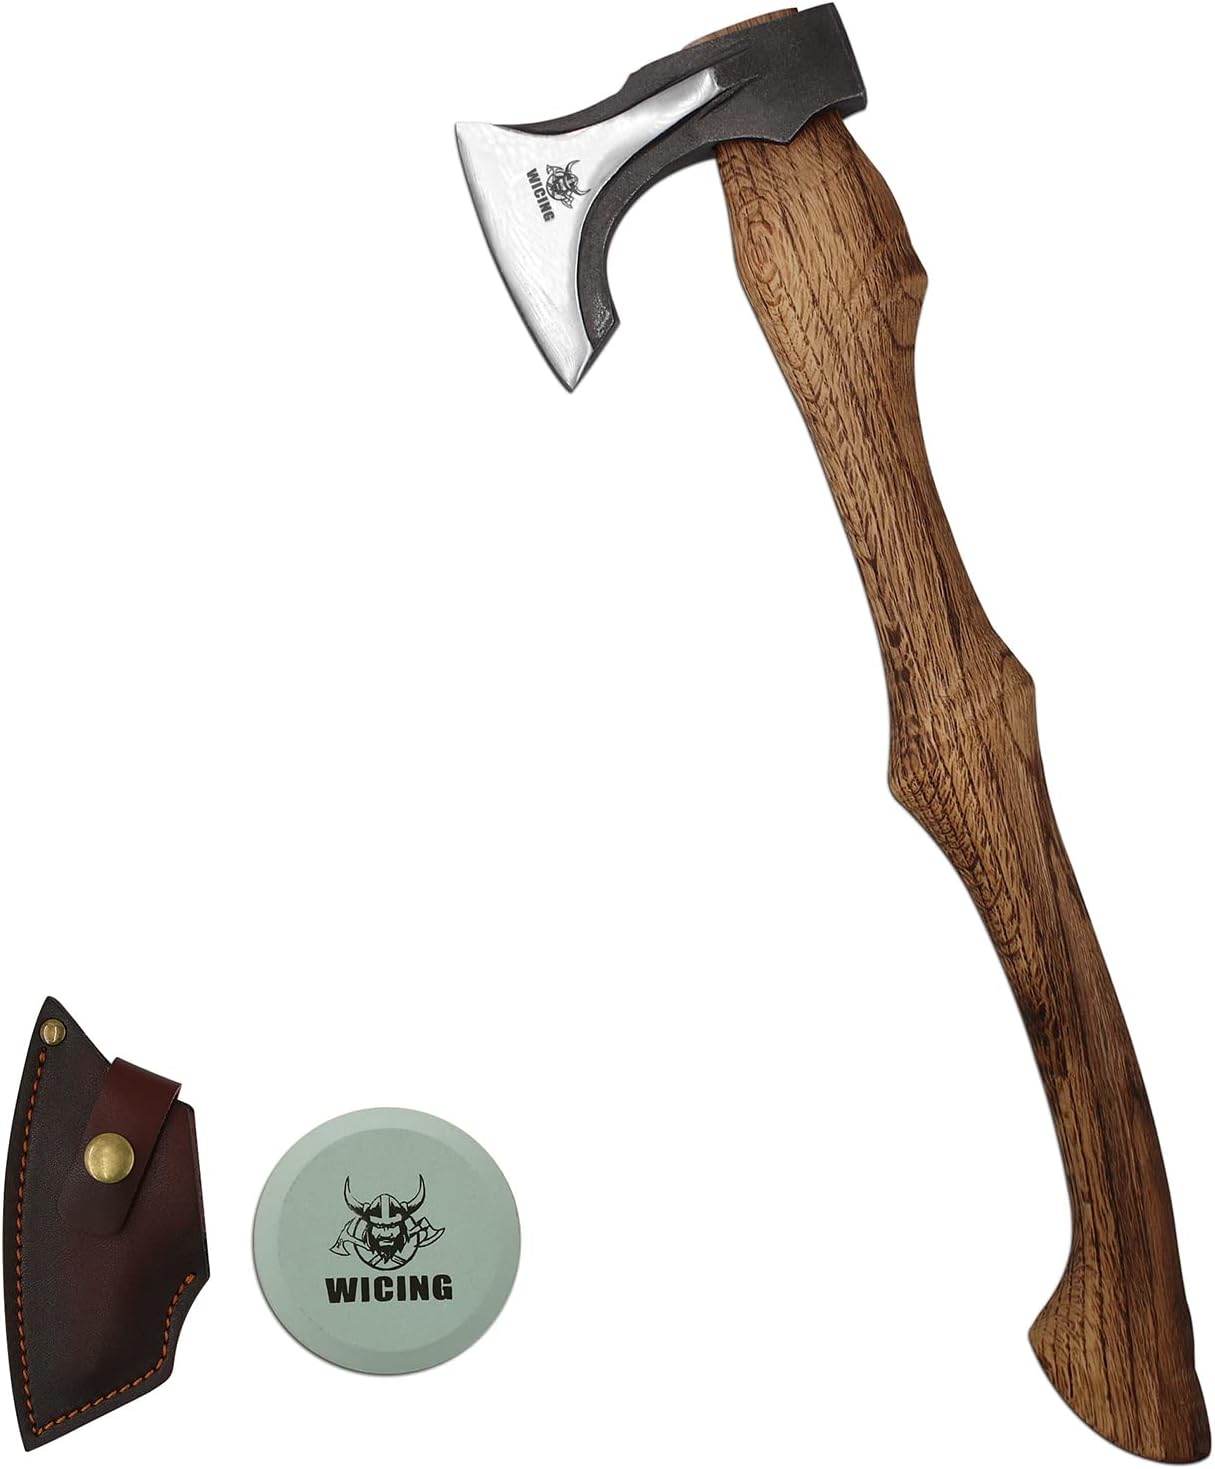 WICING Splitting Axe, 21.5-inch Chopping Axe with Leather Sheath, Camping Hatchet 1055 High Carbon Steel and Beech Wooden Handle